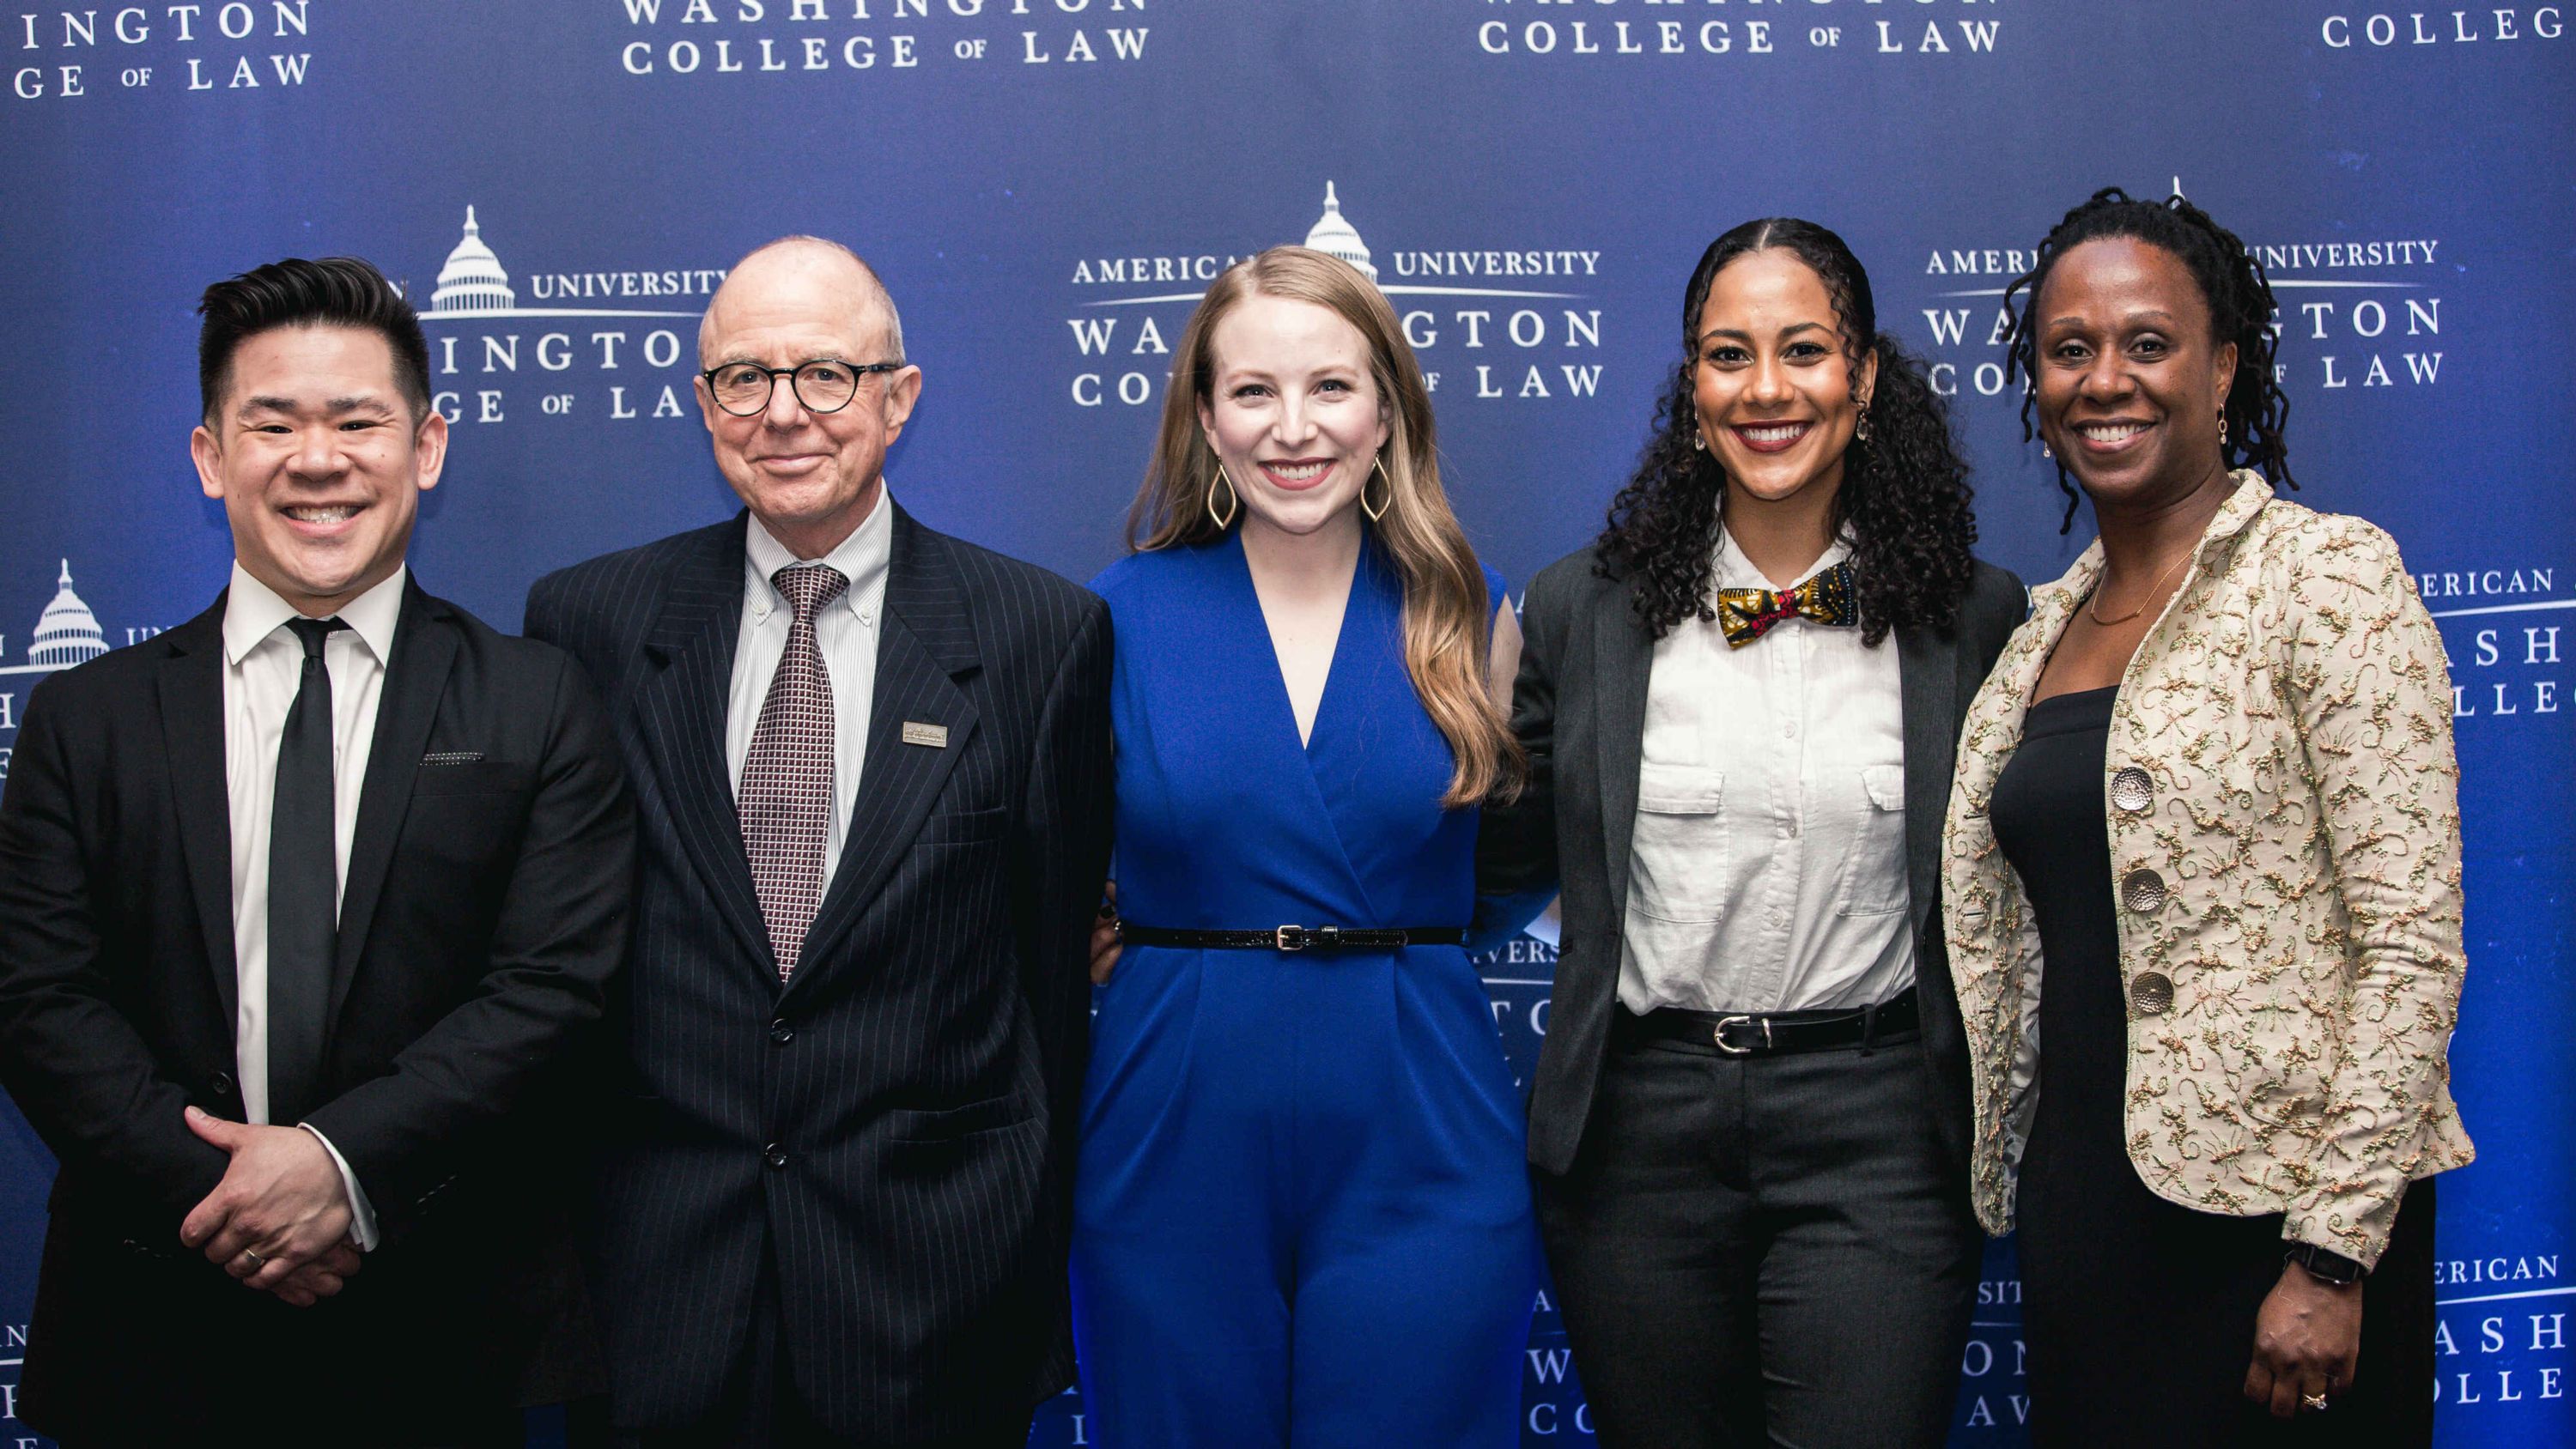 Incoming Myers Society Chair Eric Huang ’05, current Myers Society Chair Tom Morante ’77, Myers Law Scholarship recipient Stephanie M. Daigle, AUWCL Dean Camille Nelson, and Myers Law Scholarship recipient Lisa Ndembu